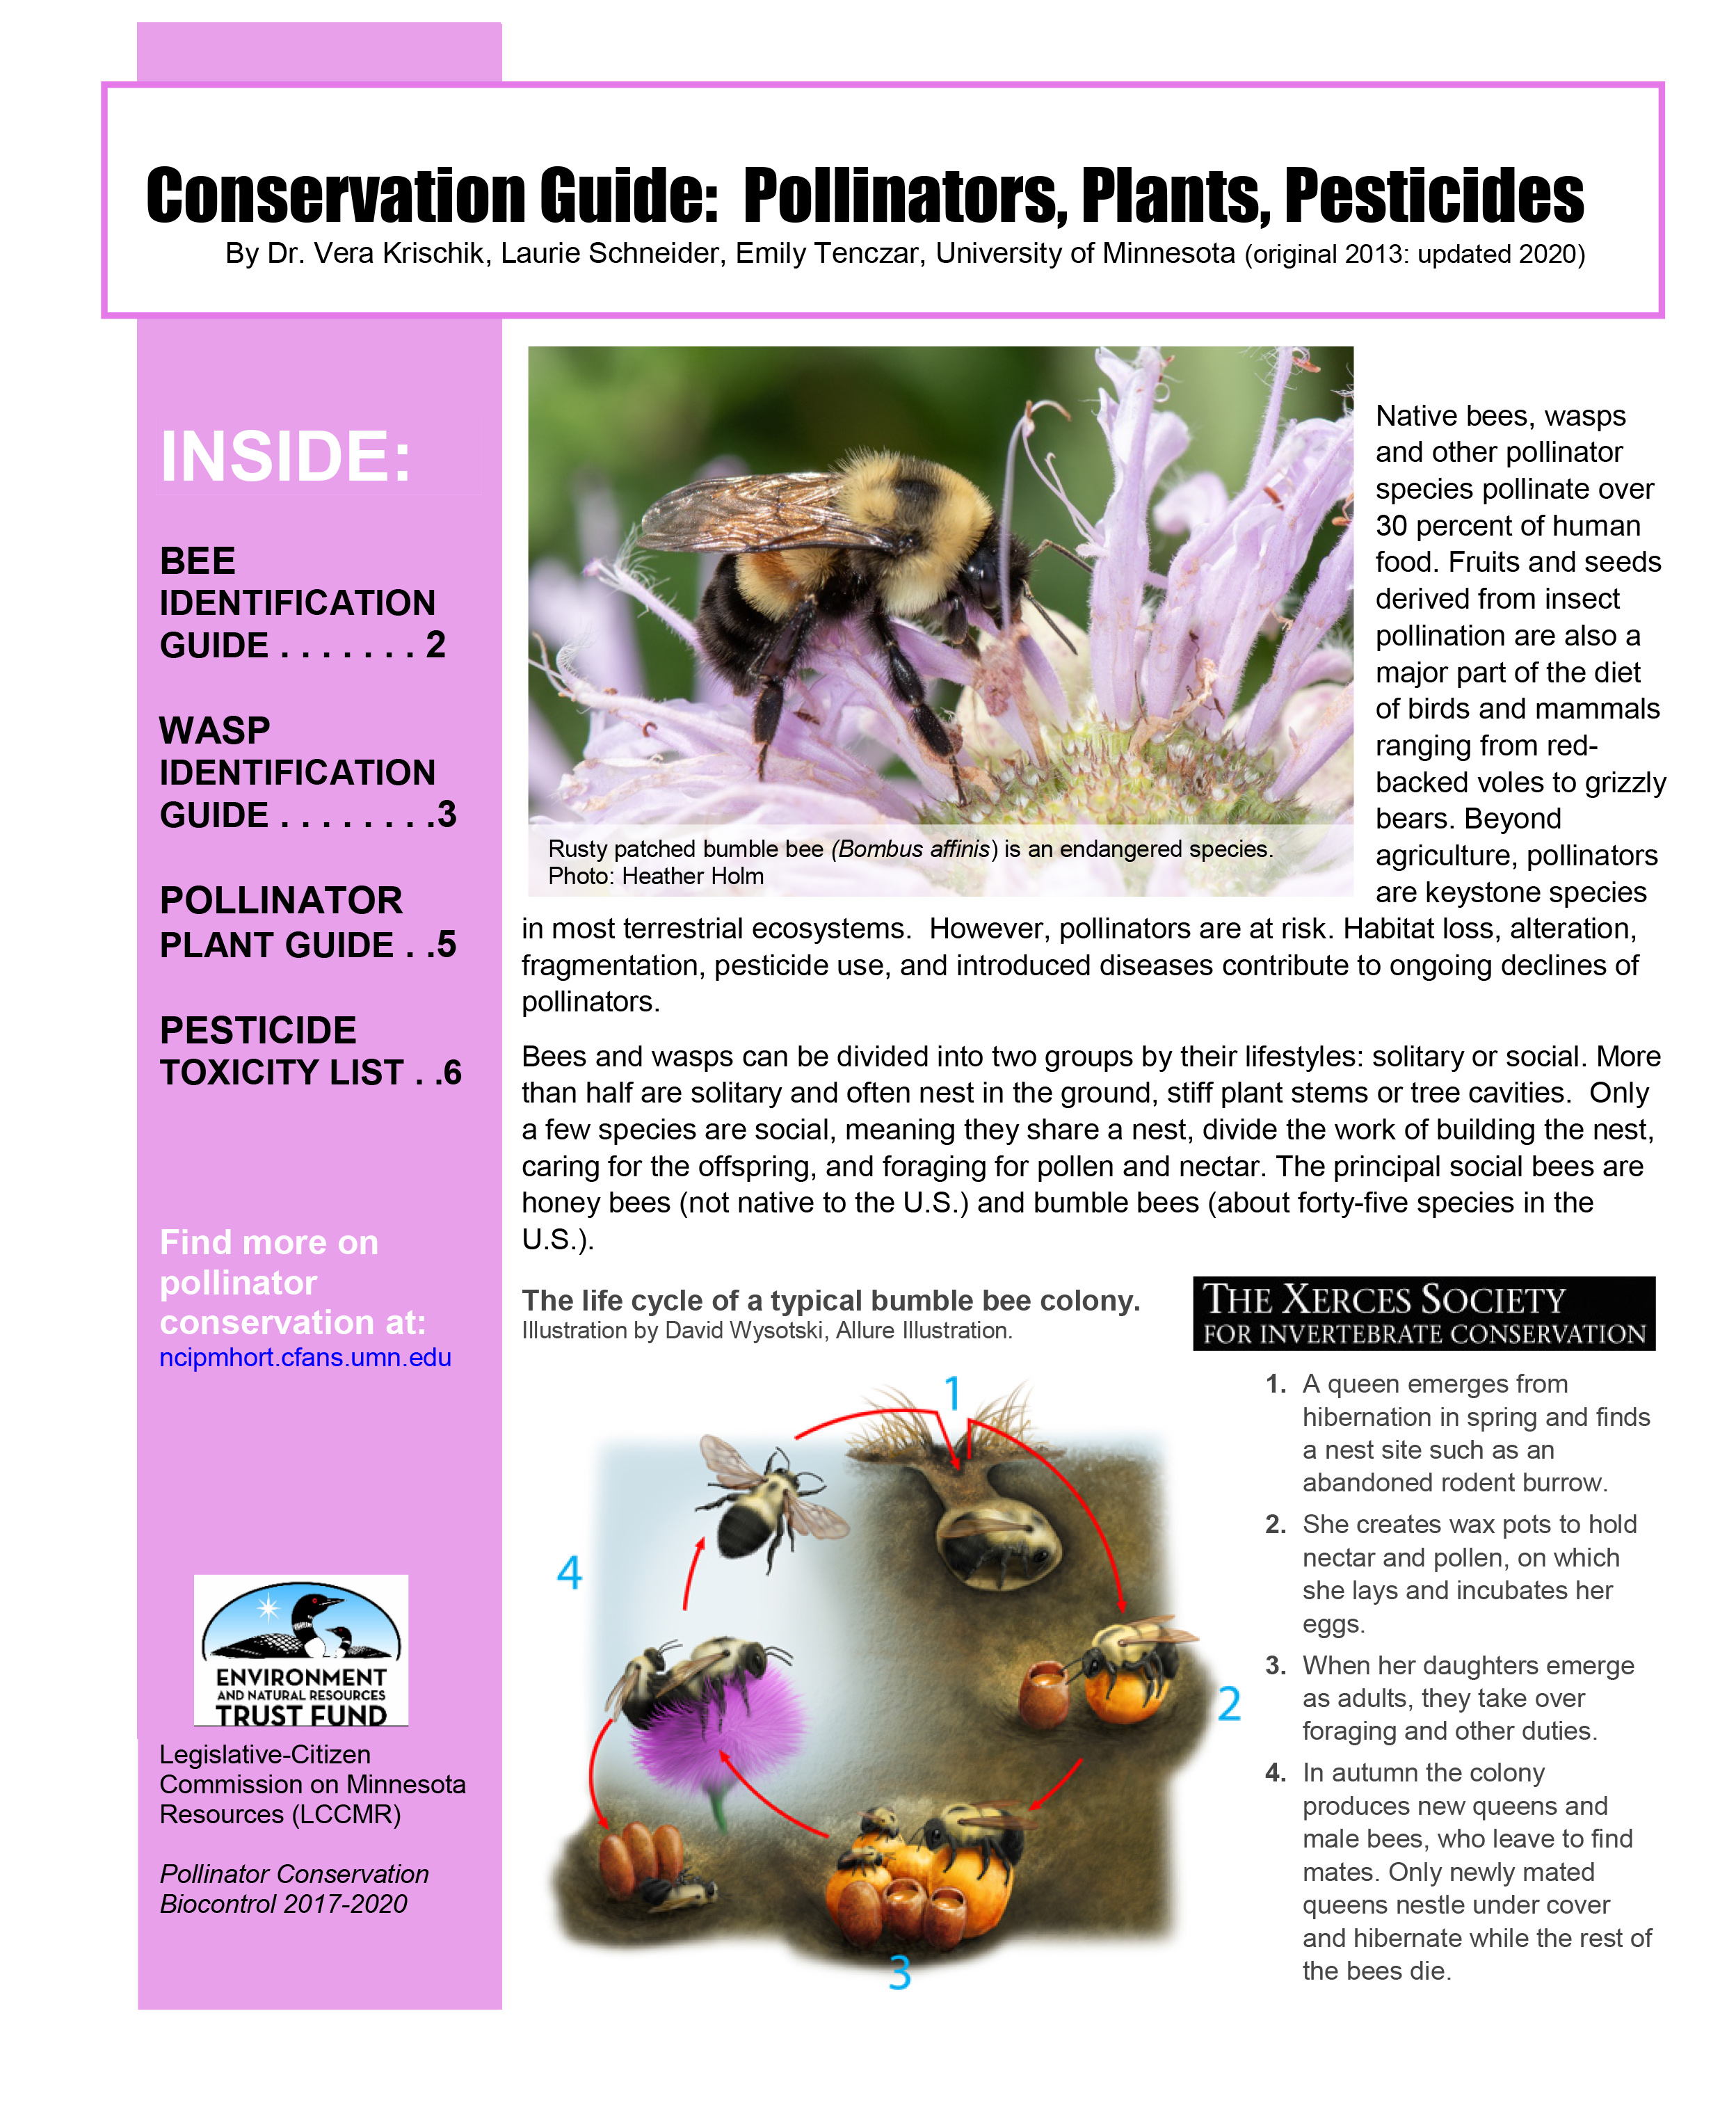 pollinator conservation guide image